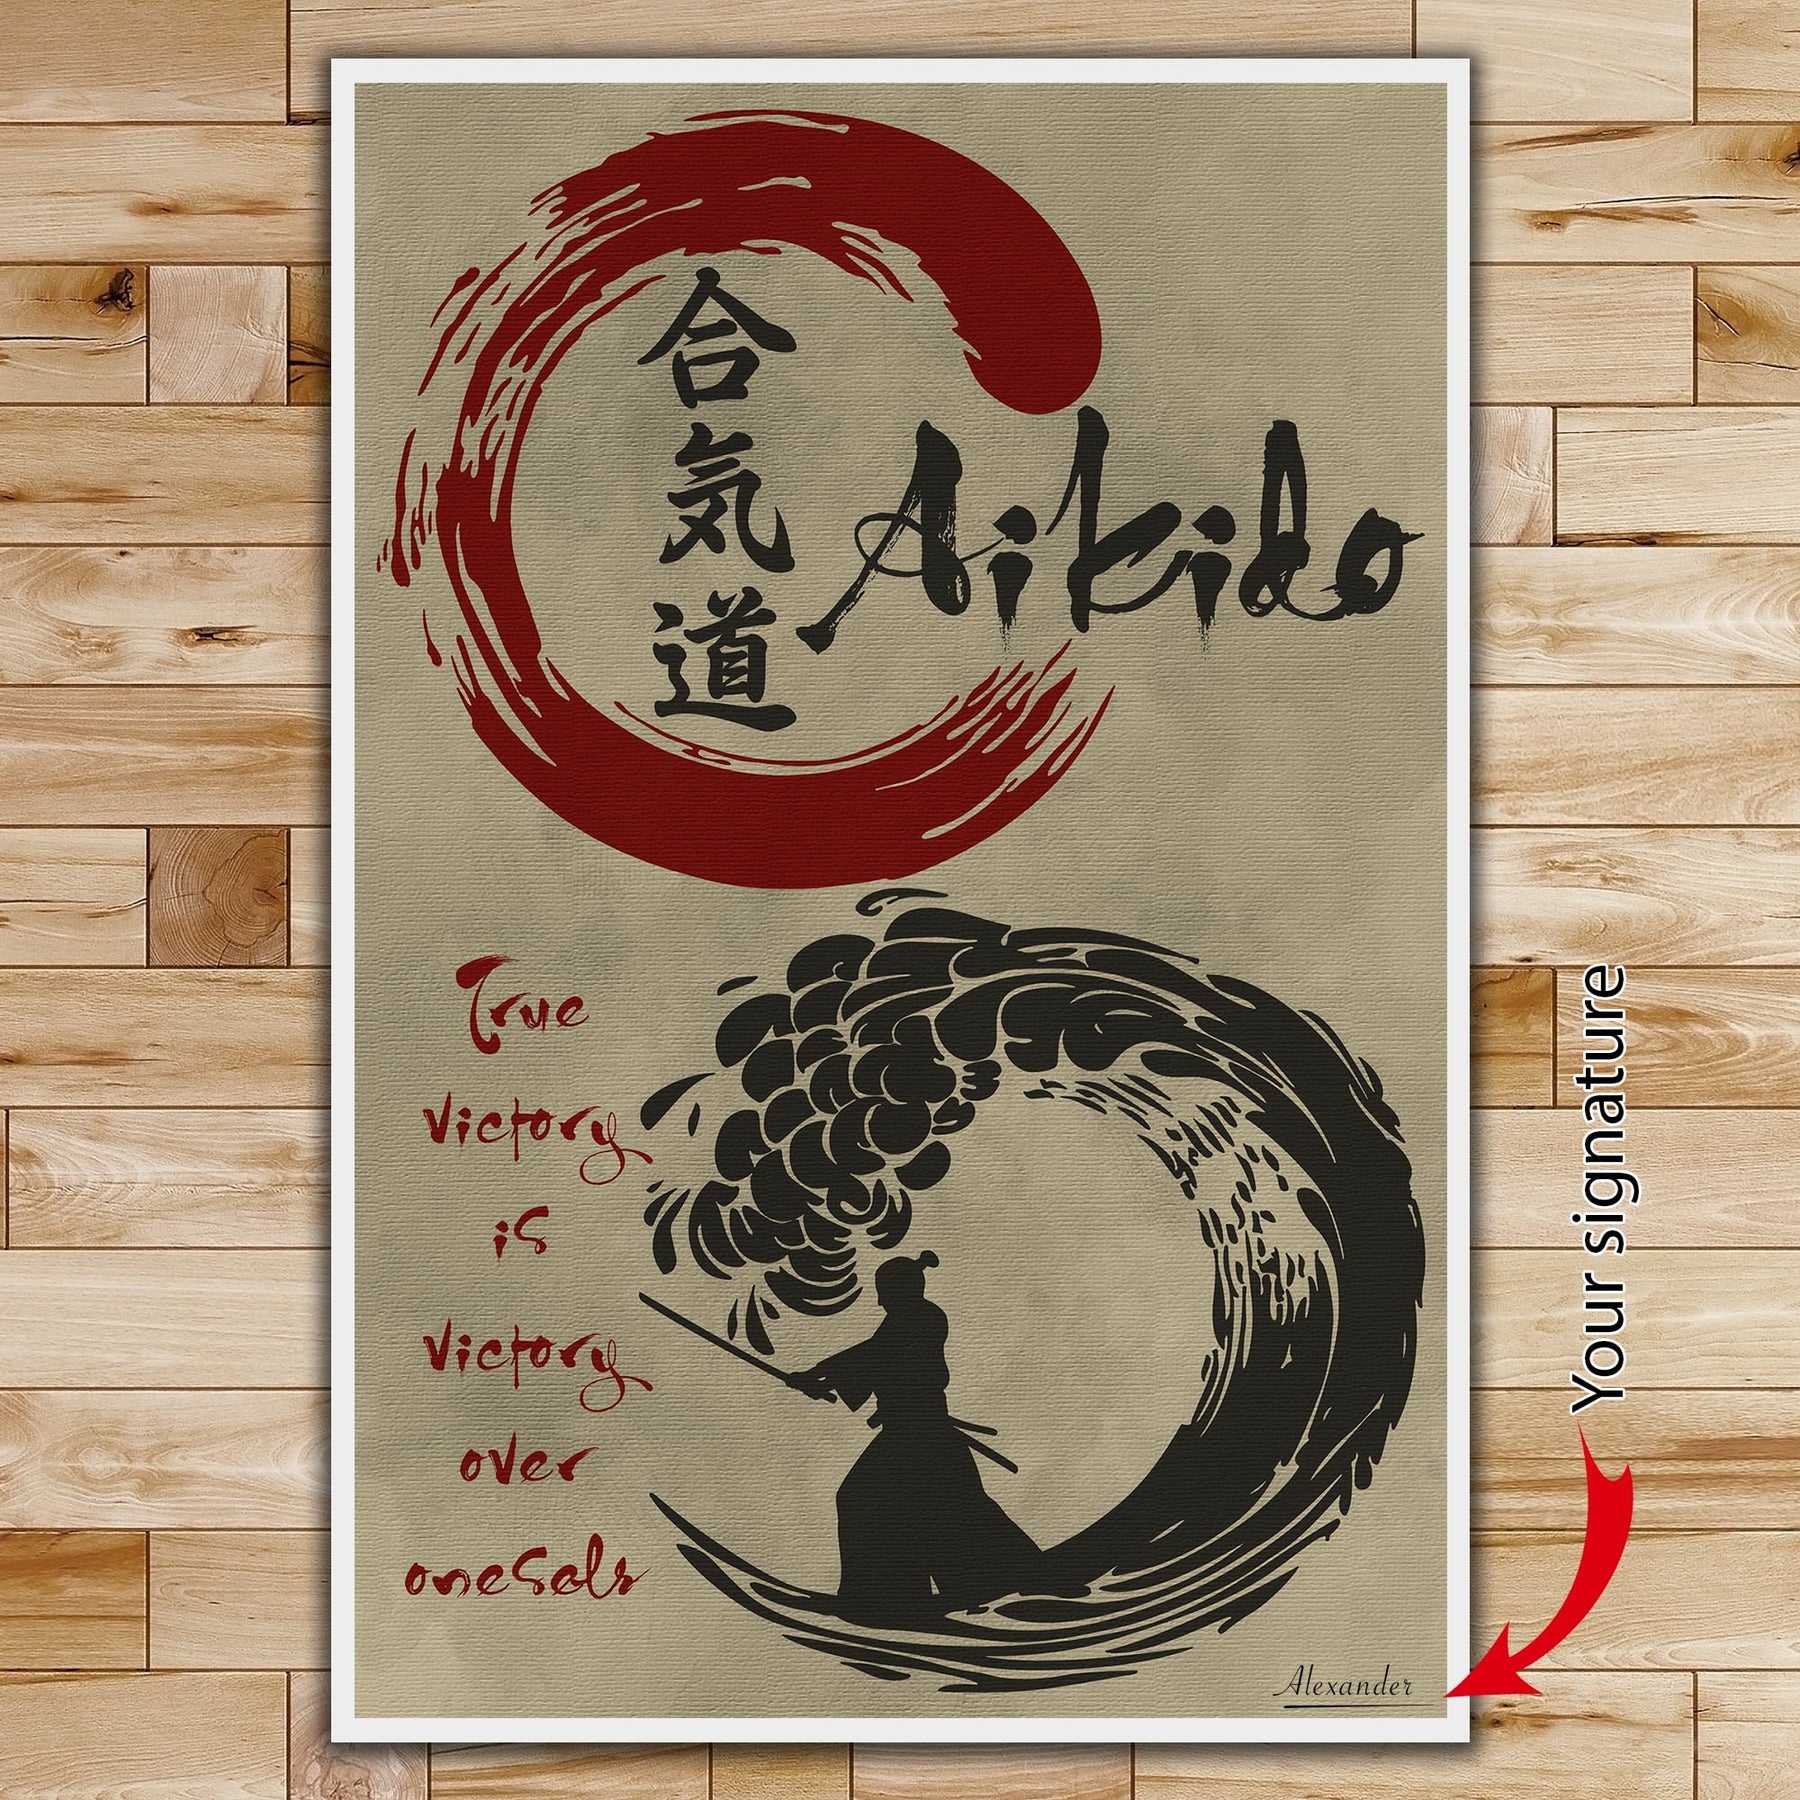 AI015 - True Victory Is Victory Over Oneself - Vertical Poster - Vertical Canvas - Aikido Poster